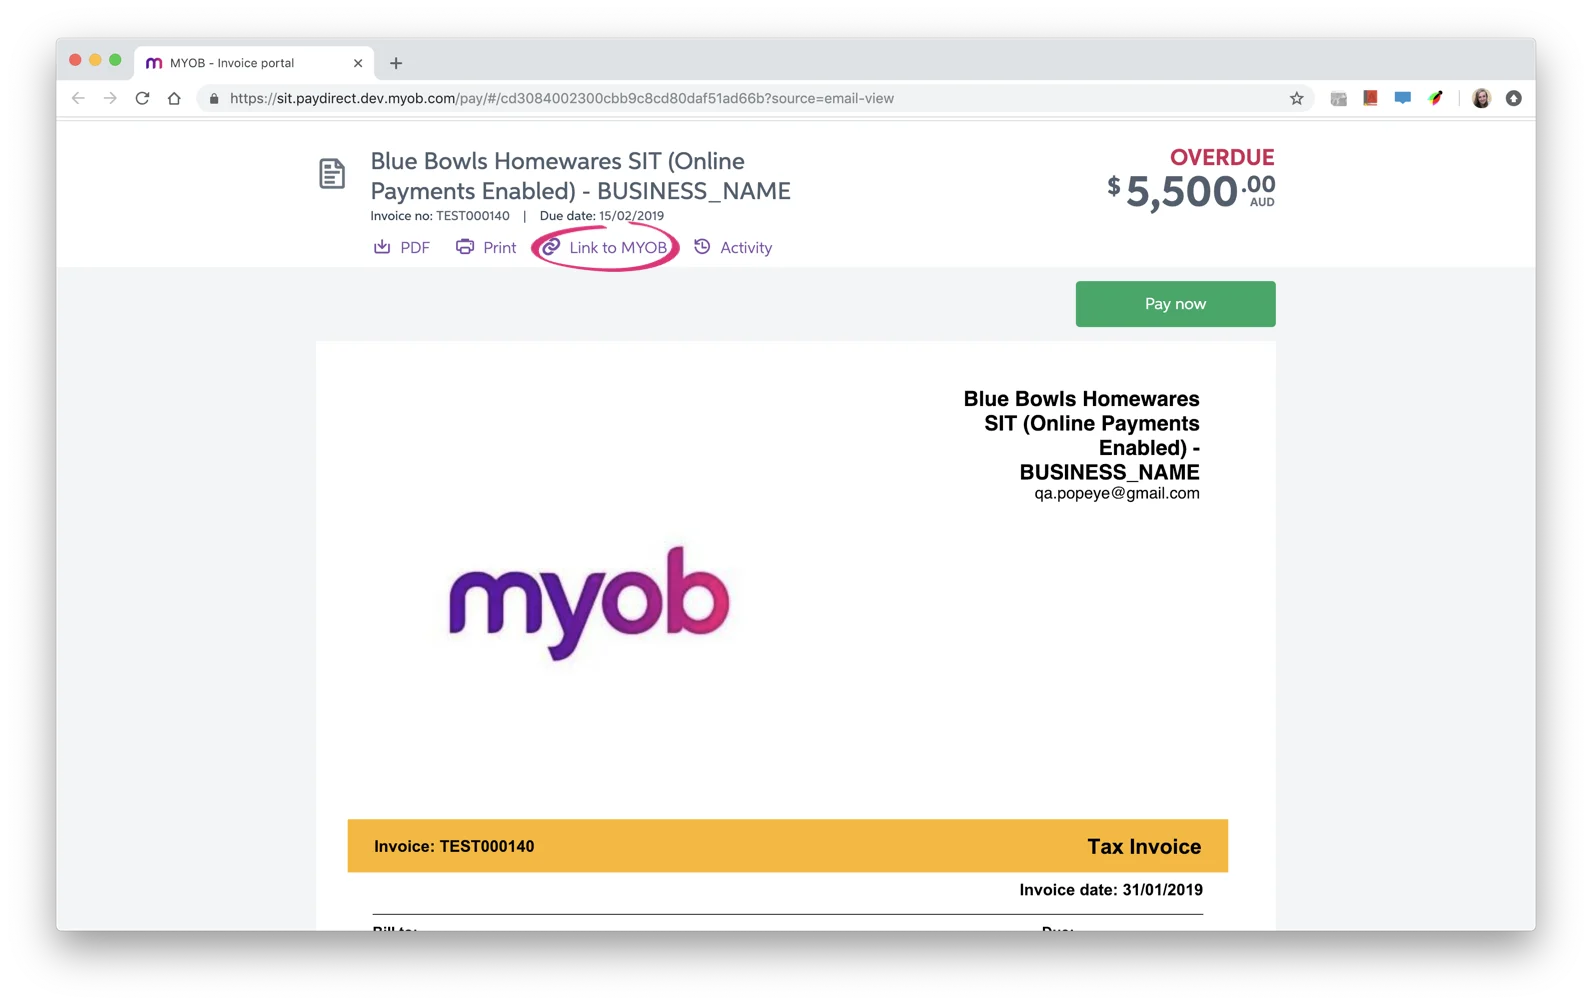 Link to MYOB button in an online invoice